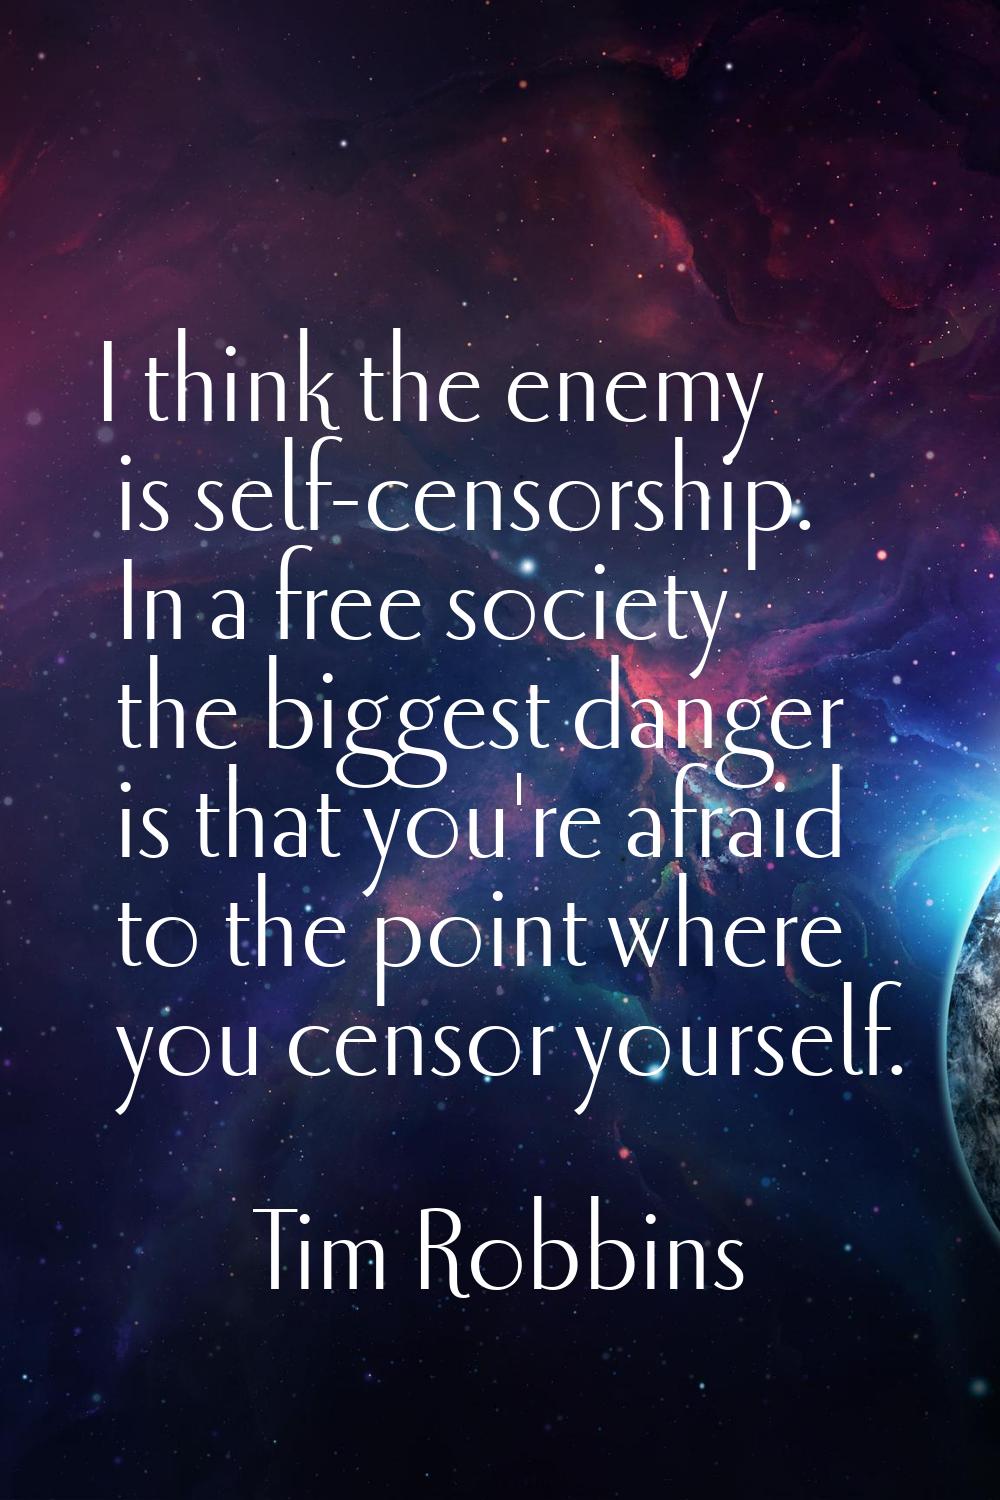 I think the enemy is self-censorship. In a free society the biggest danger is that you're afraid to